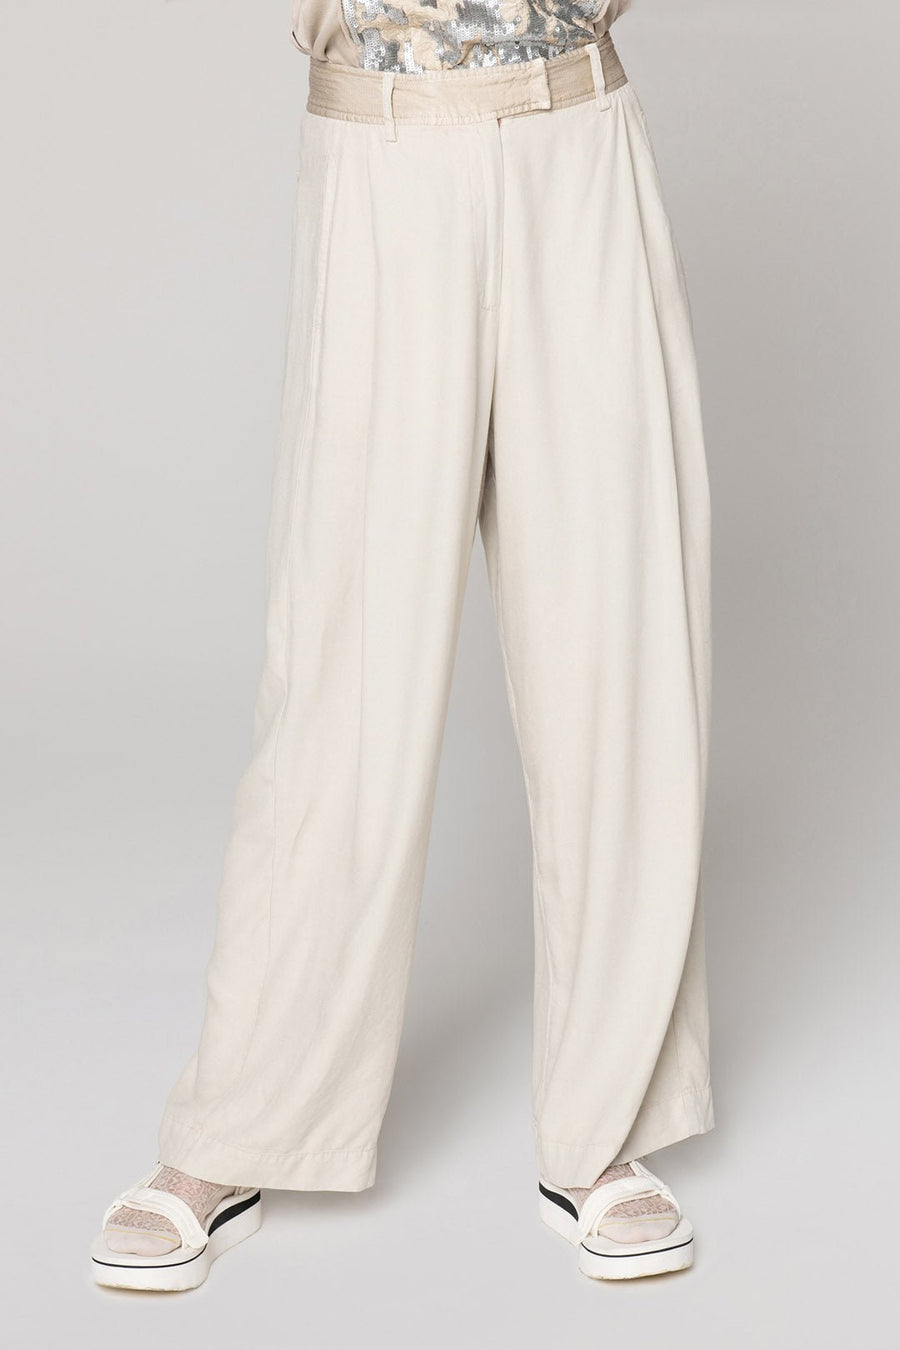 NOMAD HIGH WAIST PANT, SAND STONE - Burning Torch Online Boutique